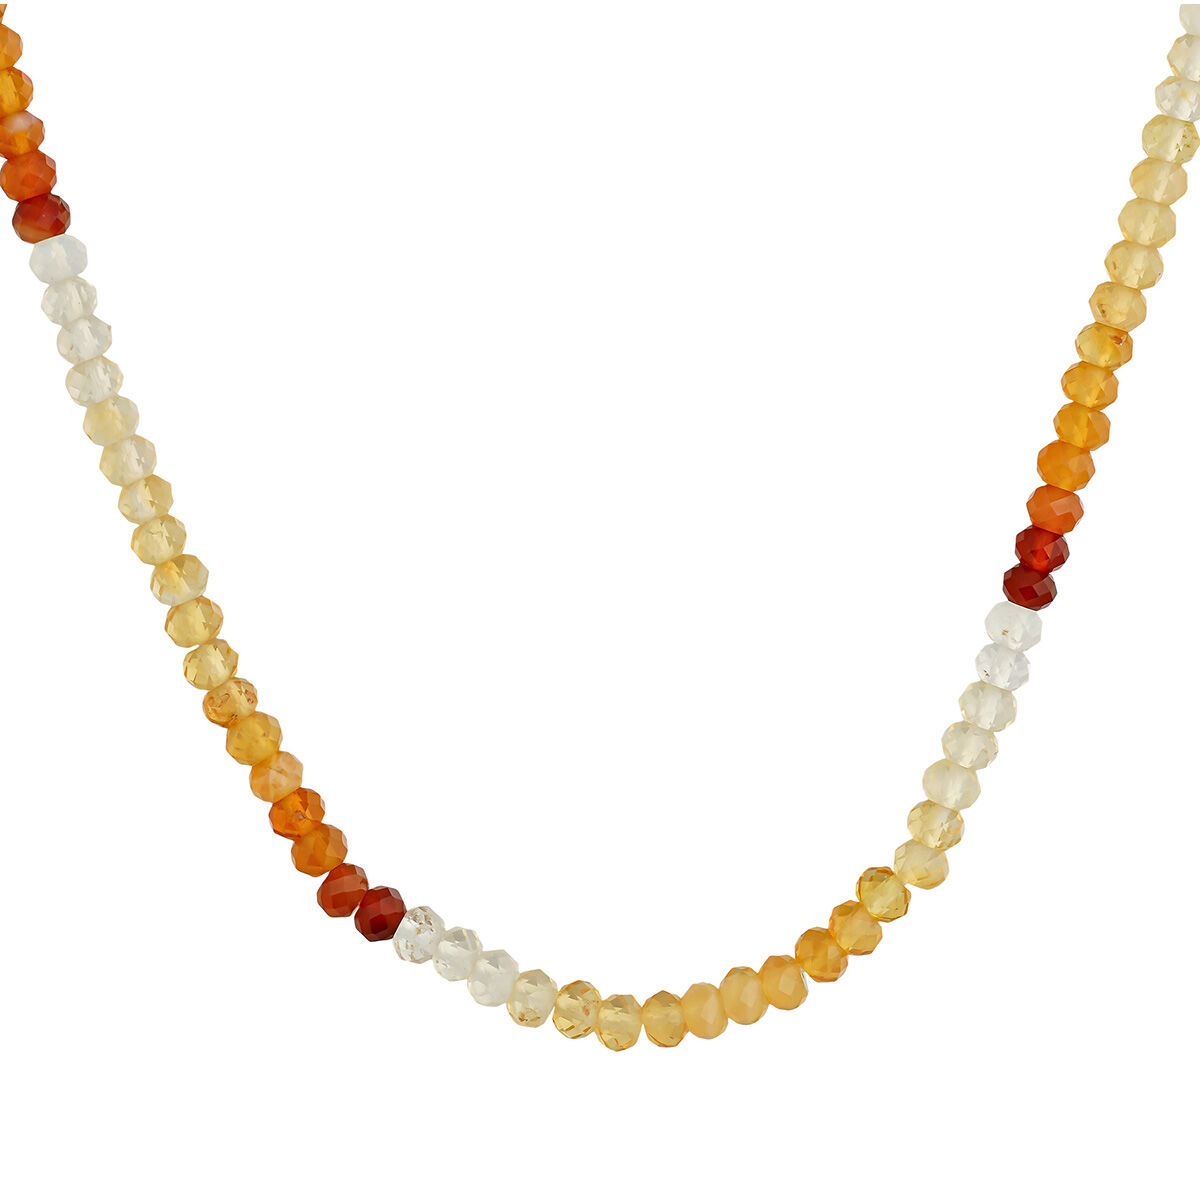 Necklace in 18k yellow gold-plated silver with multicoloured opal beads, J04922-02-MOP, hi-res